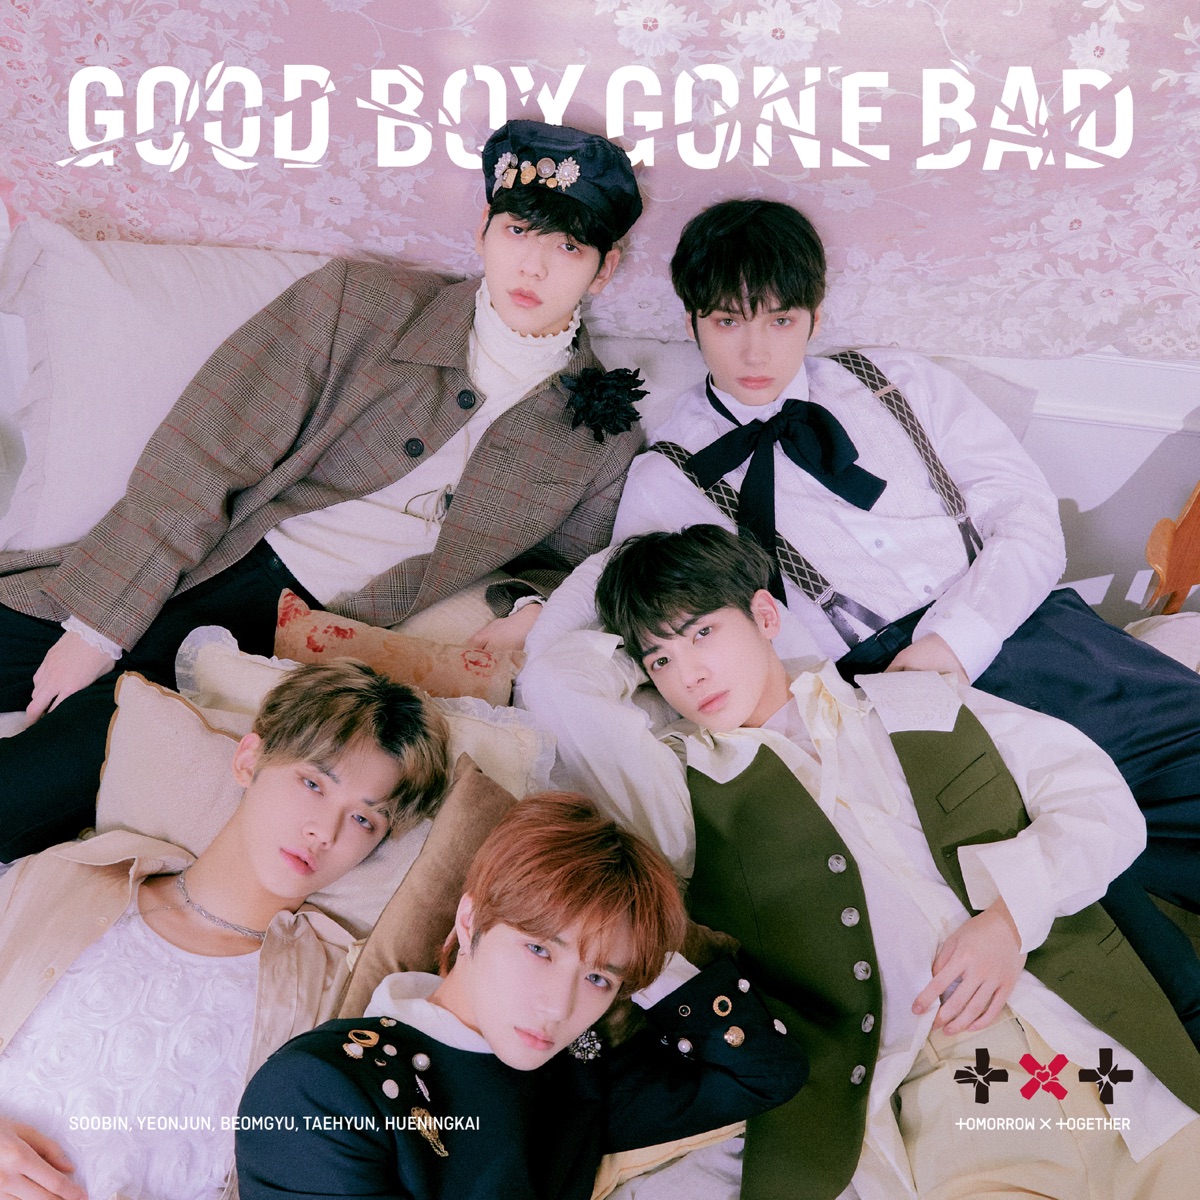 Cover art for『TOMORROW X TOGETHER - ひとりの夜』from the release『GOOD BOY GONE BAD